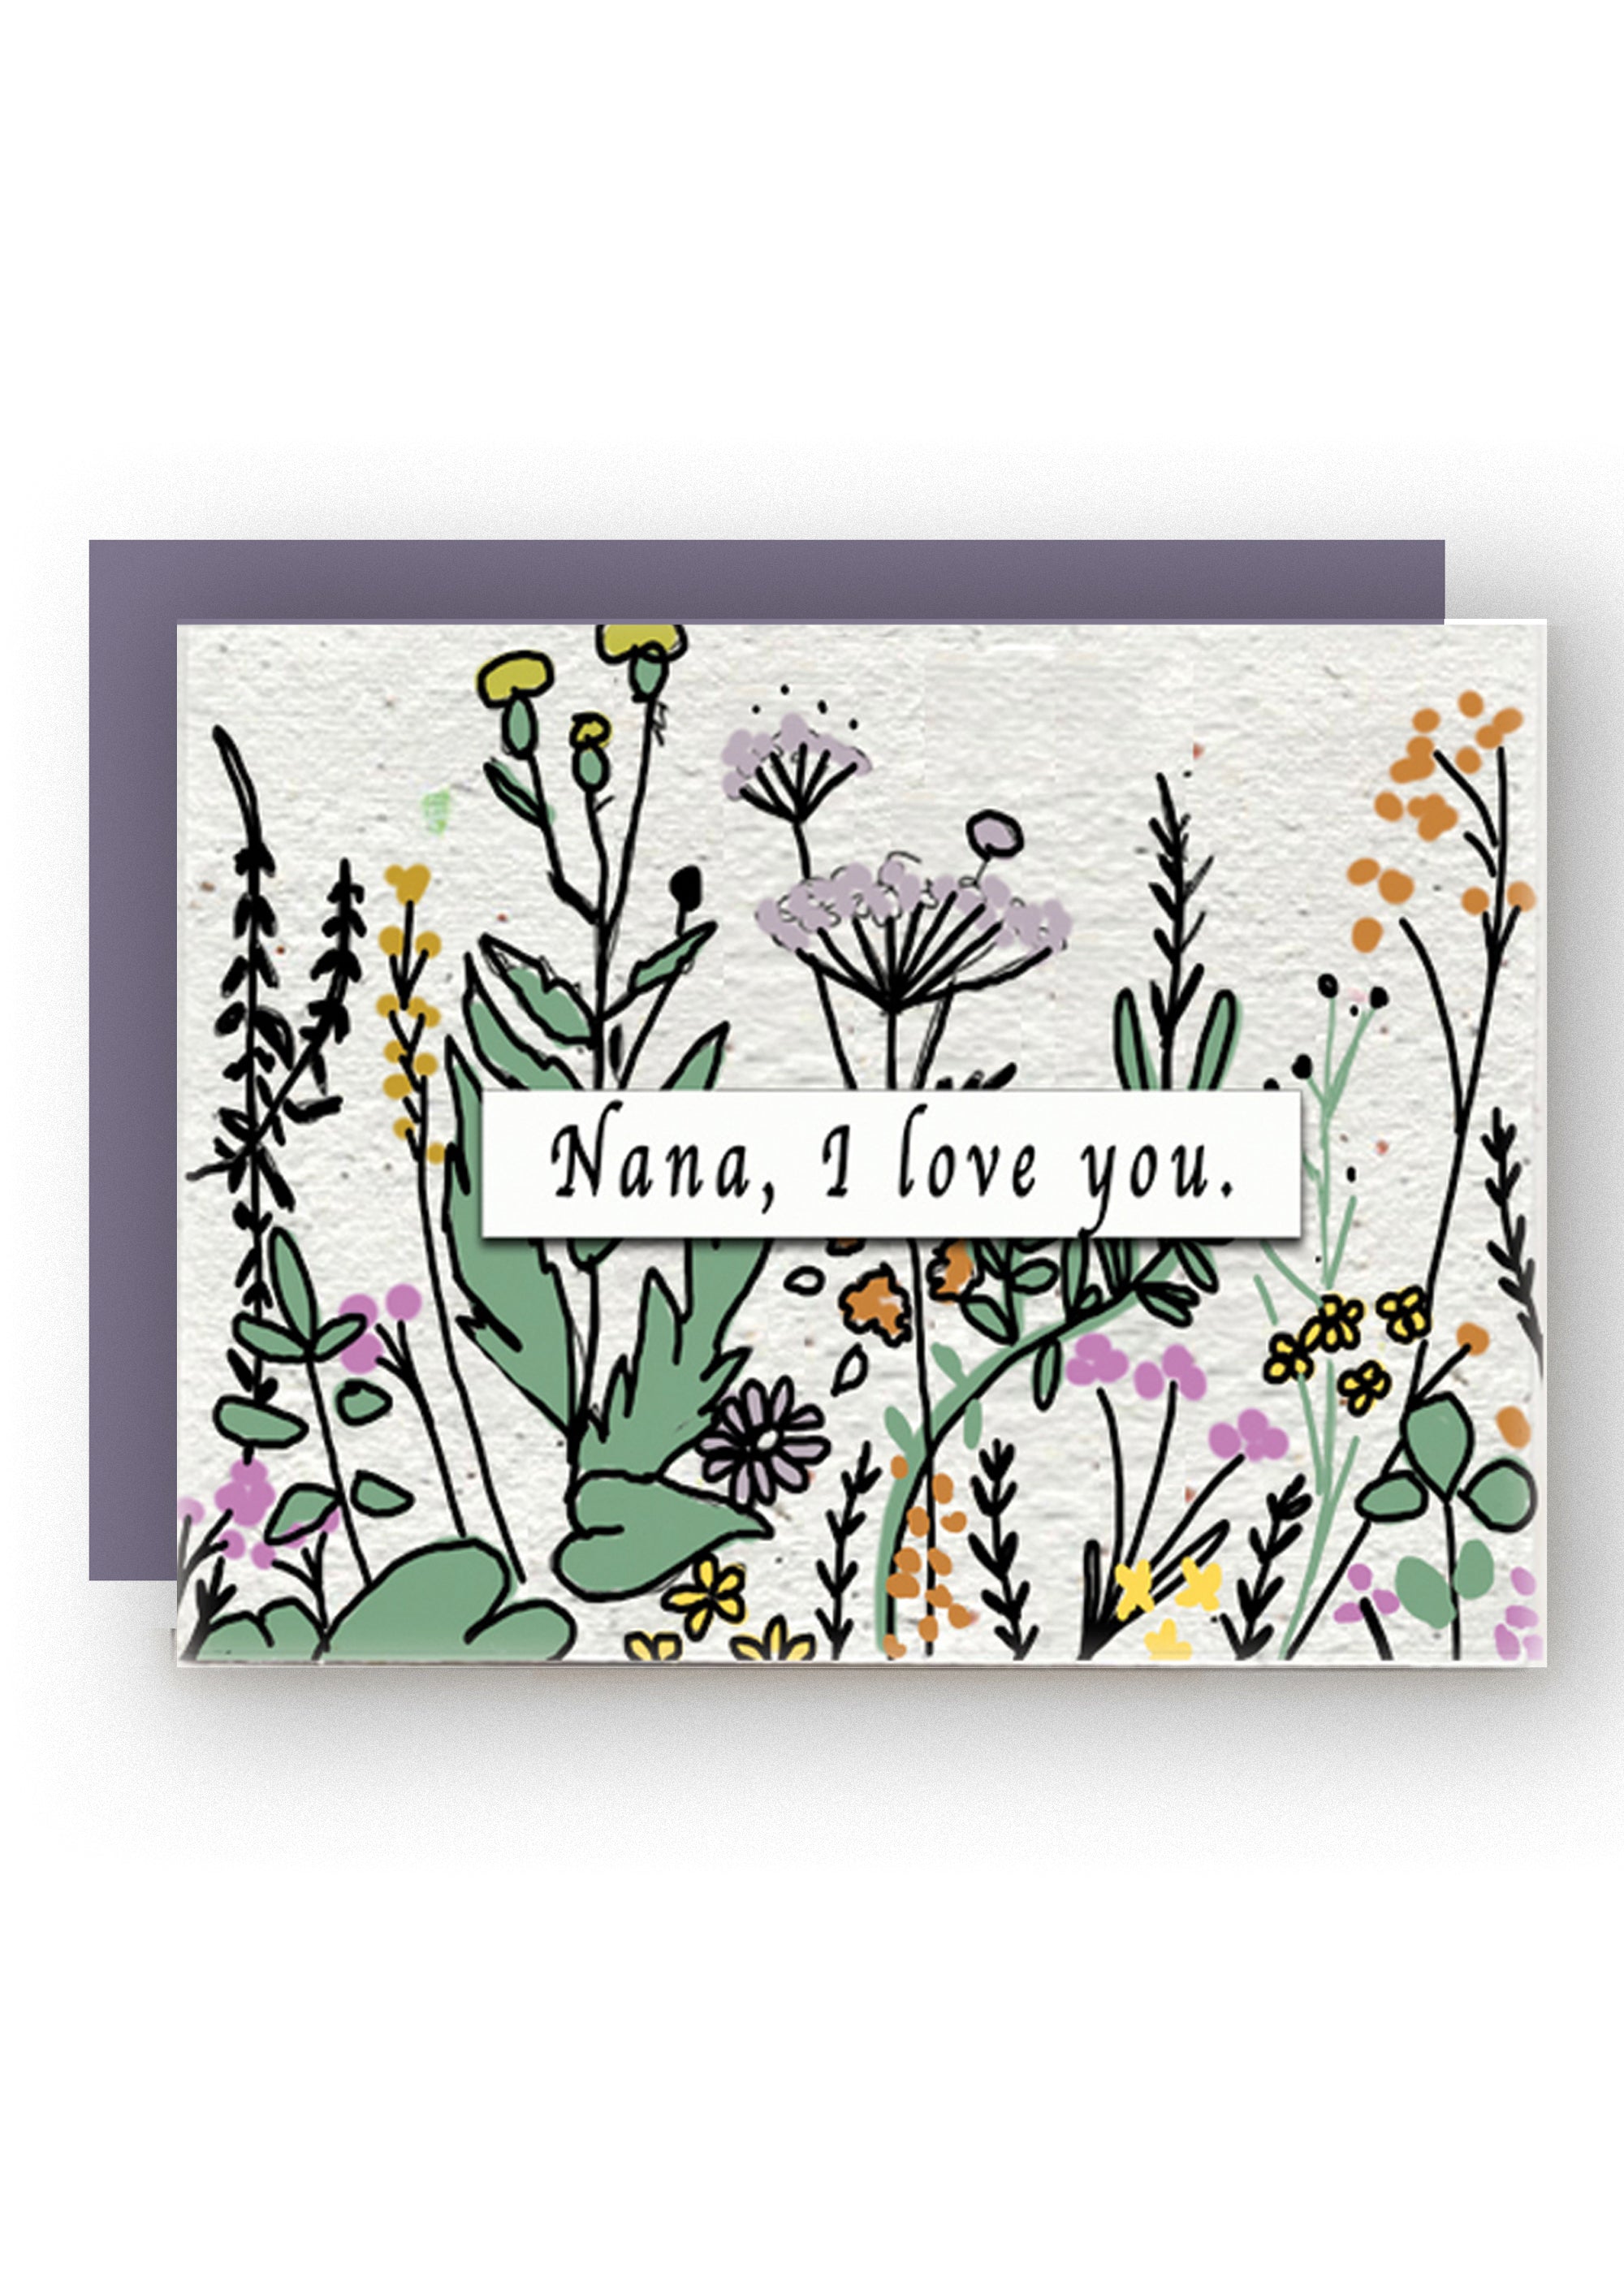 Nana's Love Blossoms Wildflower Seed Paper Card.